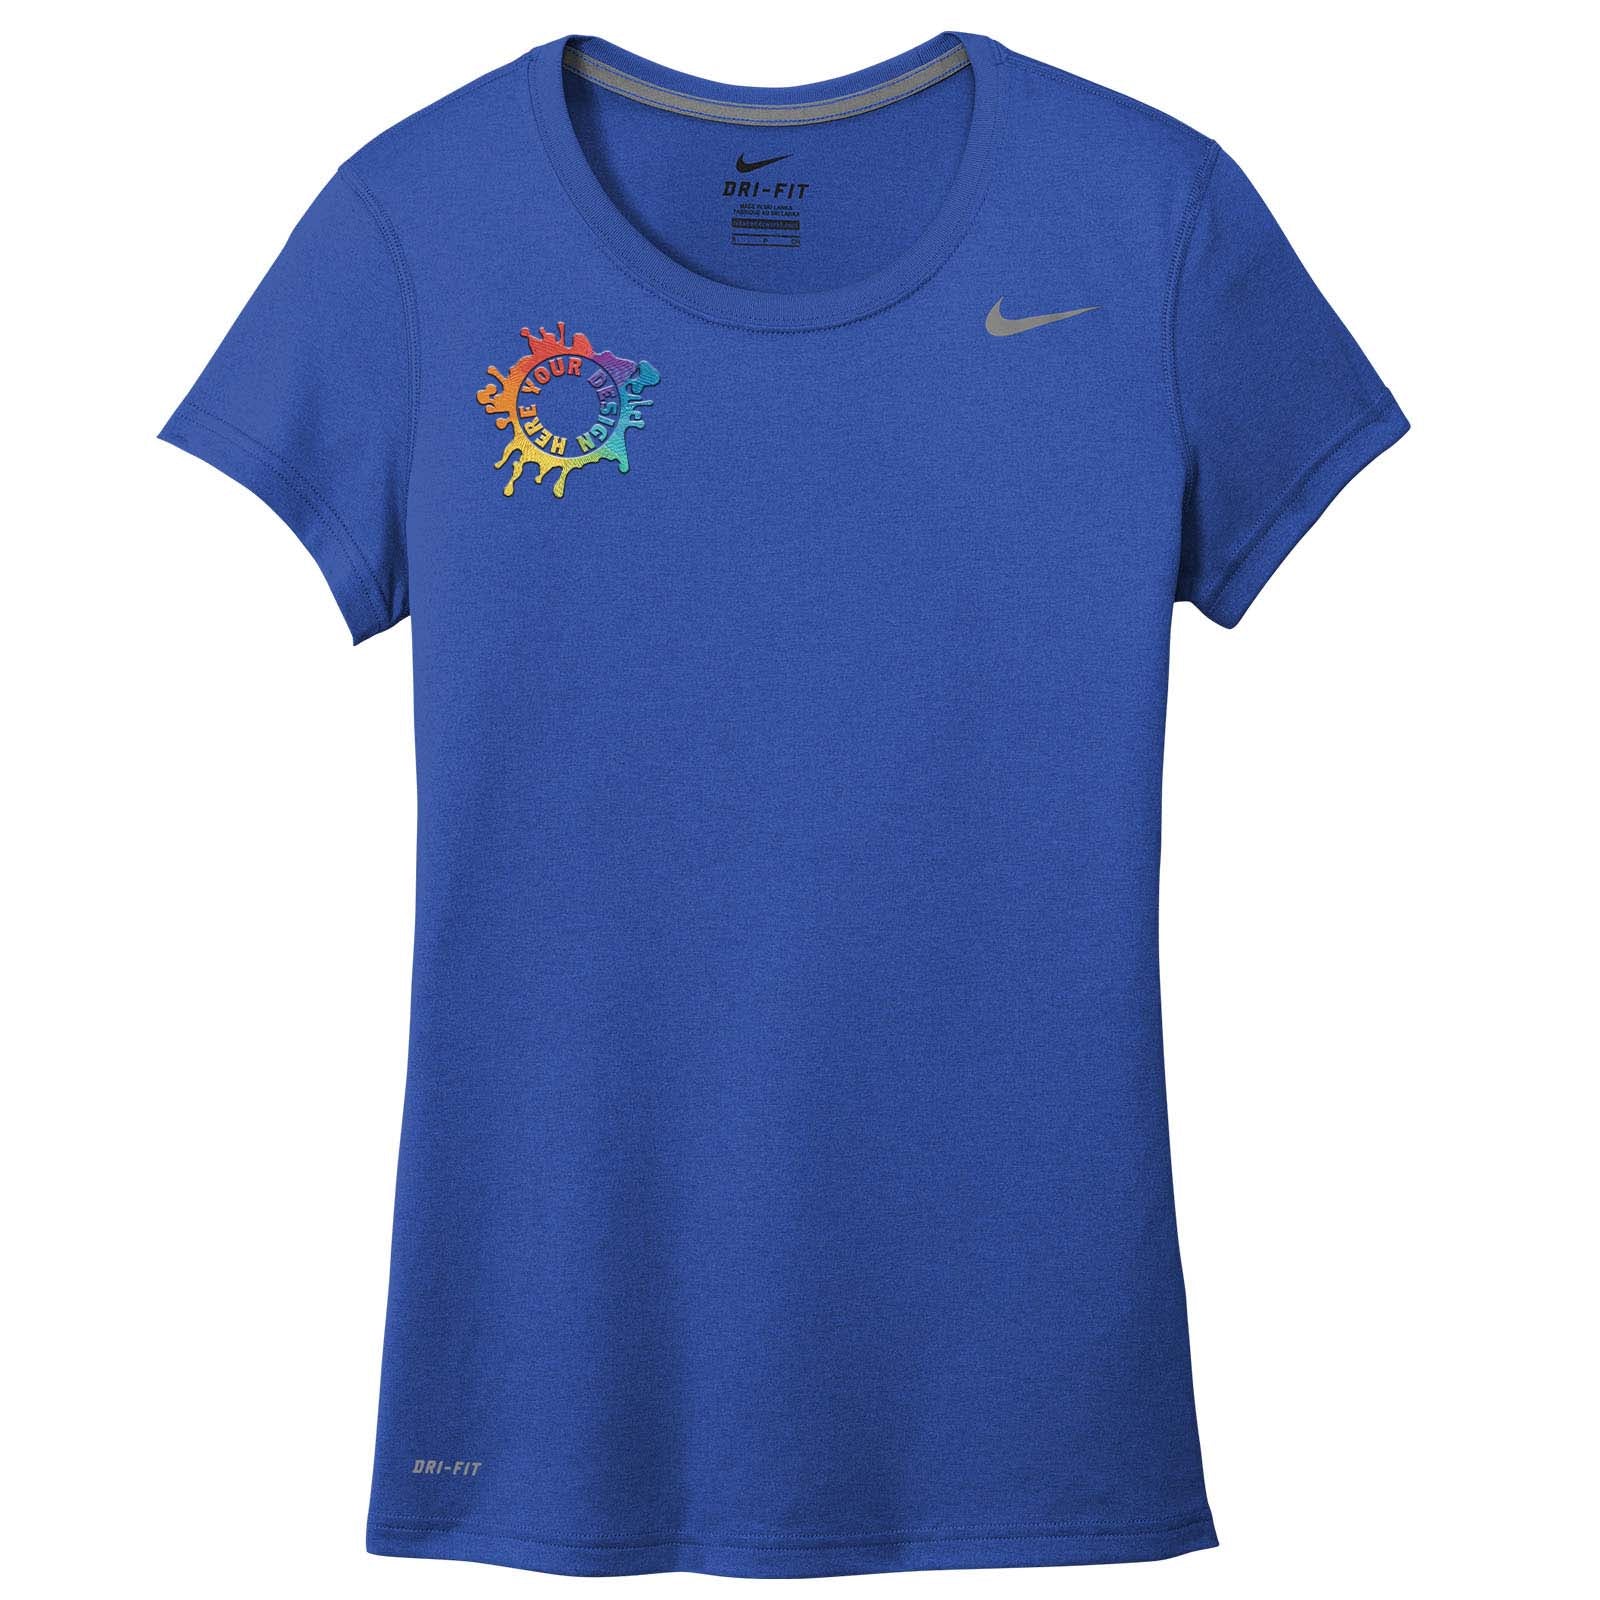 Nike Legend Women's Performance Polyester T-Shirt Embroidery - Mato & Hash